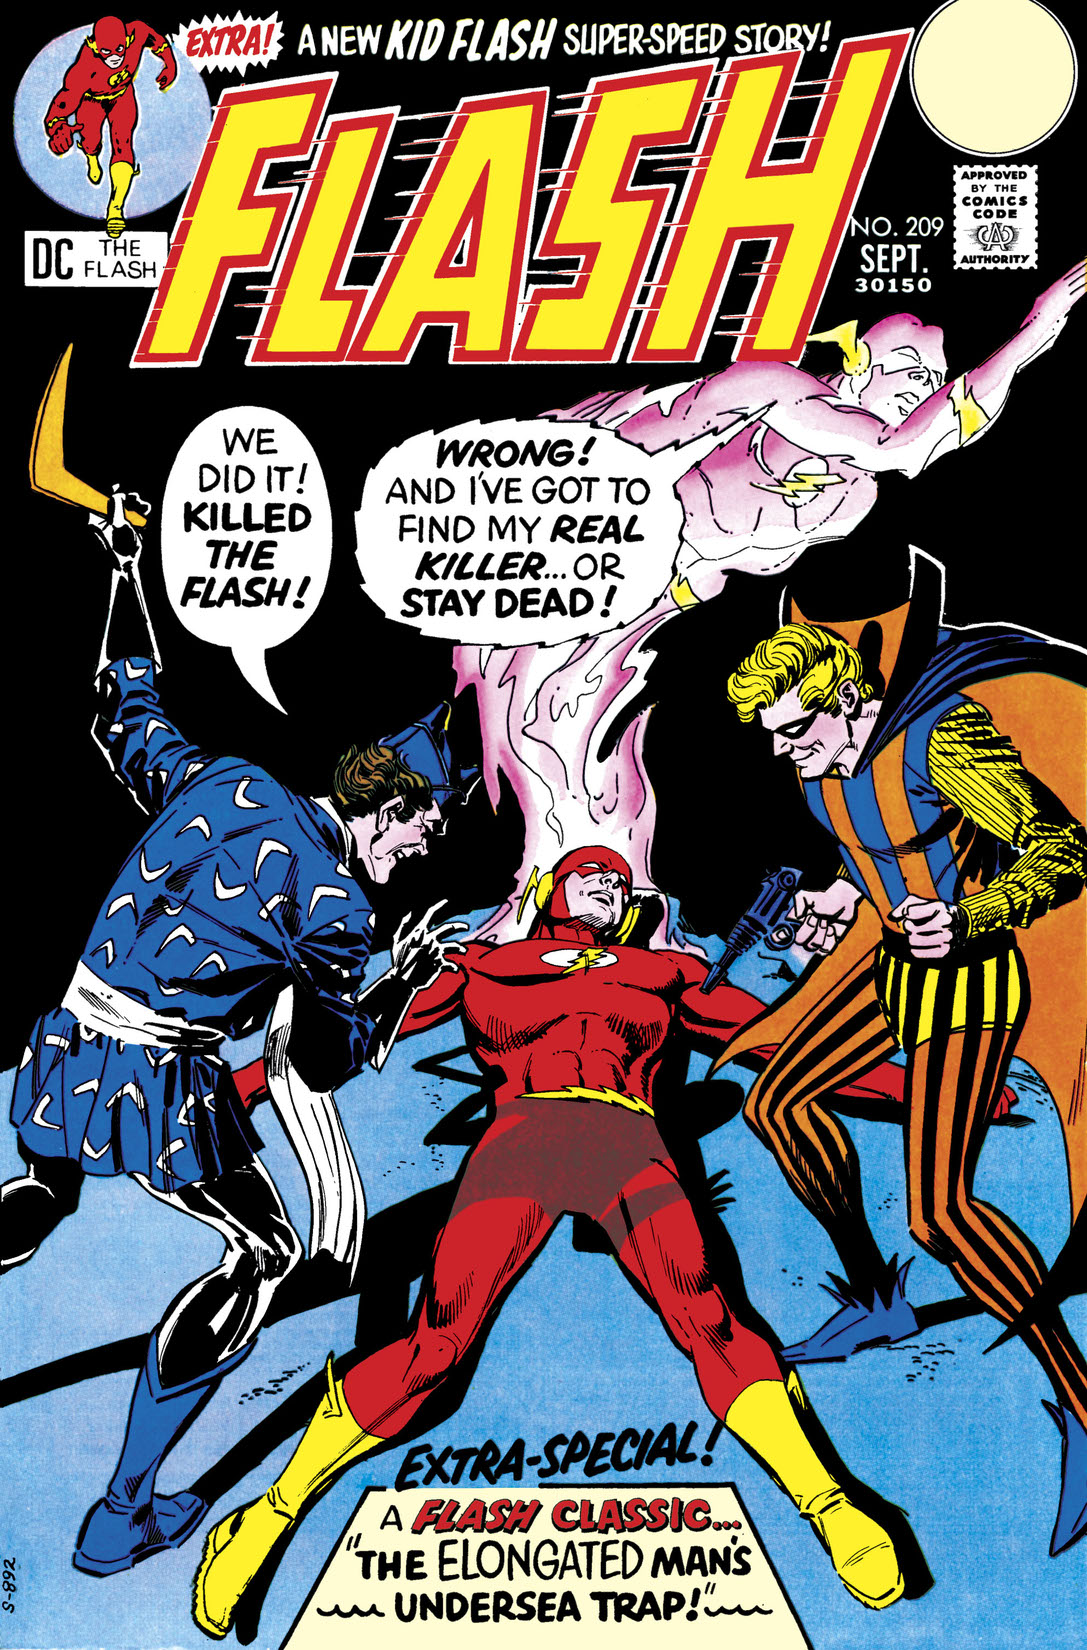 The Flash (1959-) #209 preview images